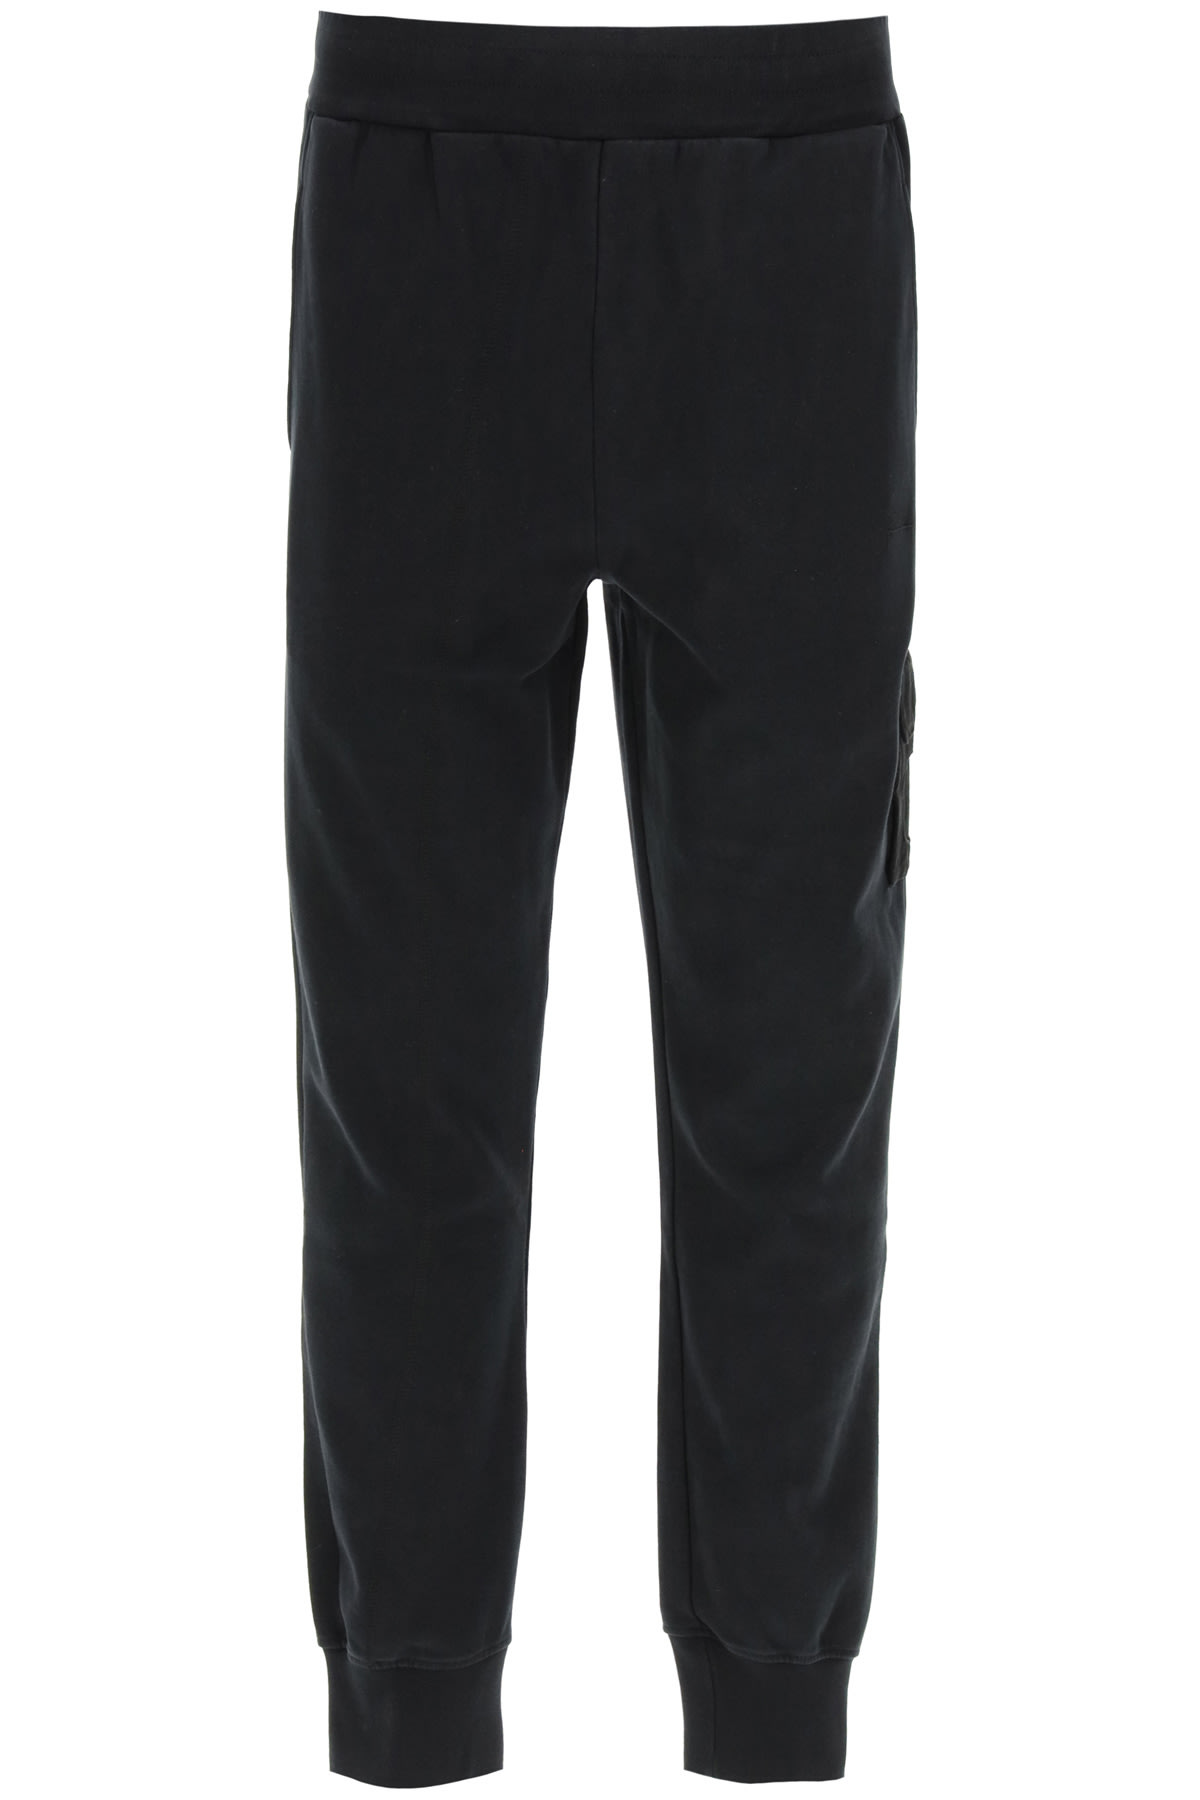 A-COLD-WALL Cotton Joggers